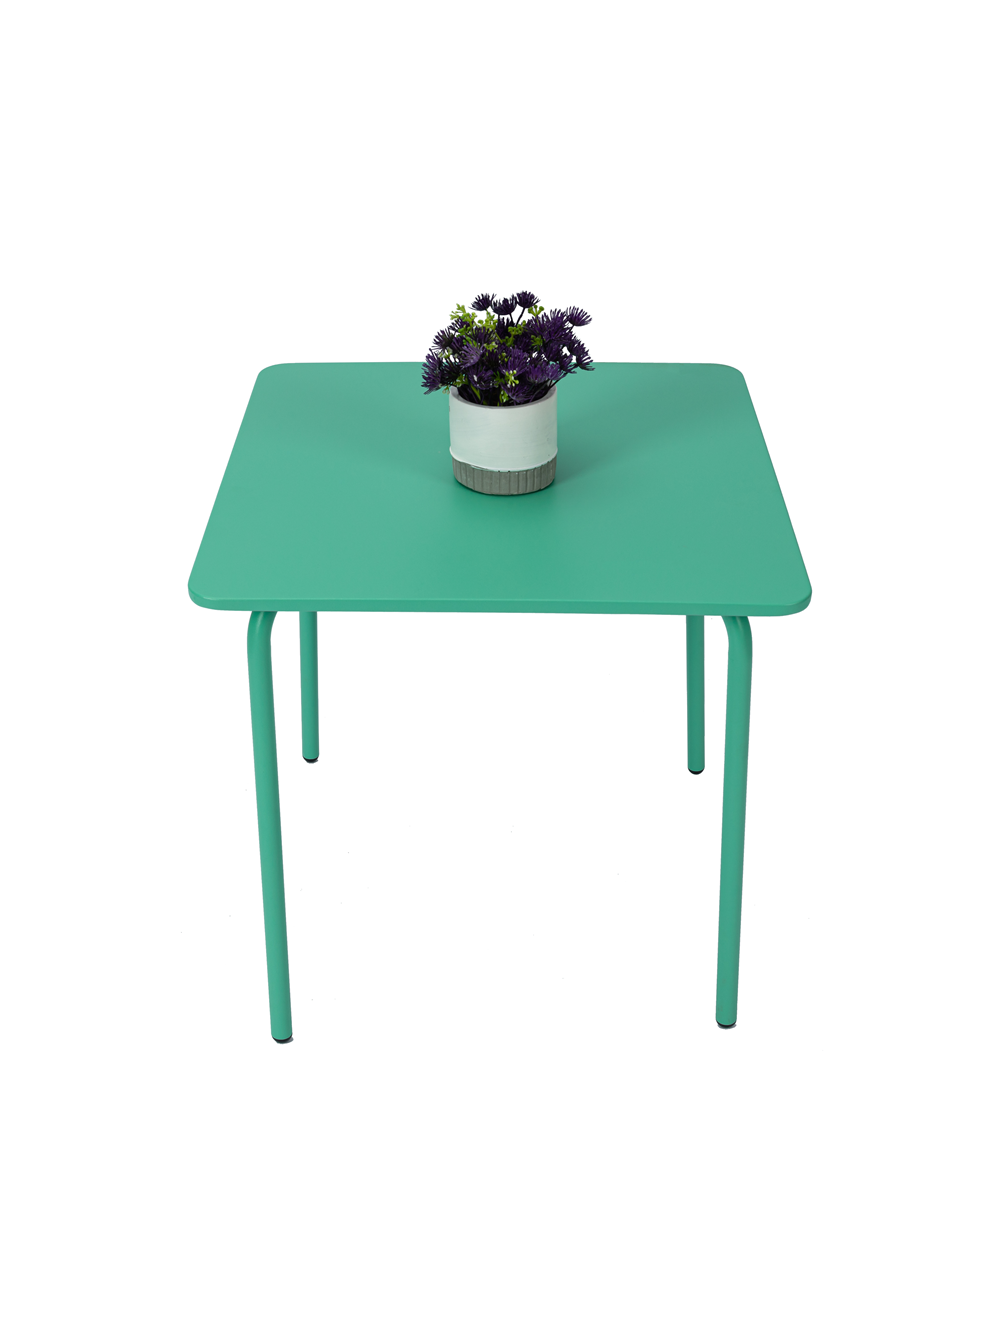 Metal Square Kids Table for Poolside